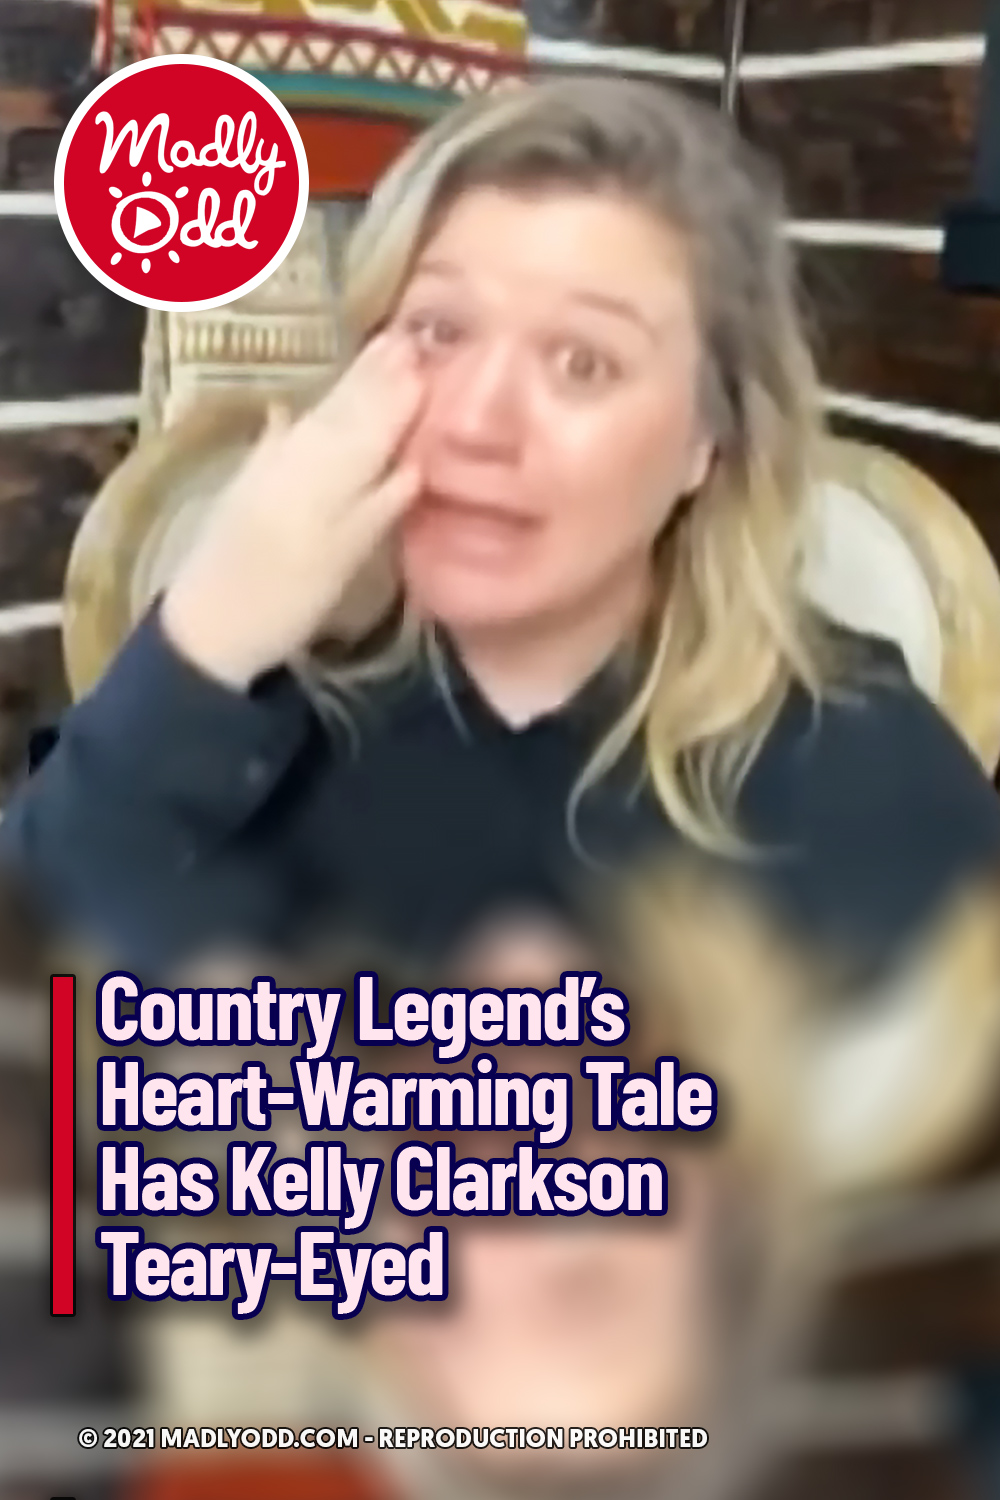 Country Legend’s Heart-Warming Tale Has Kelly Clarkson Teary-Eyed